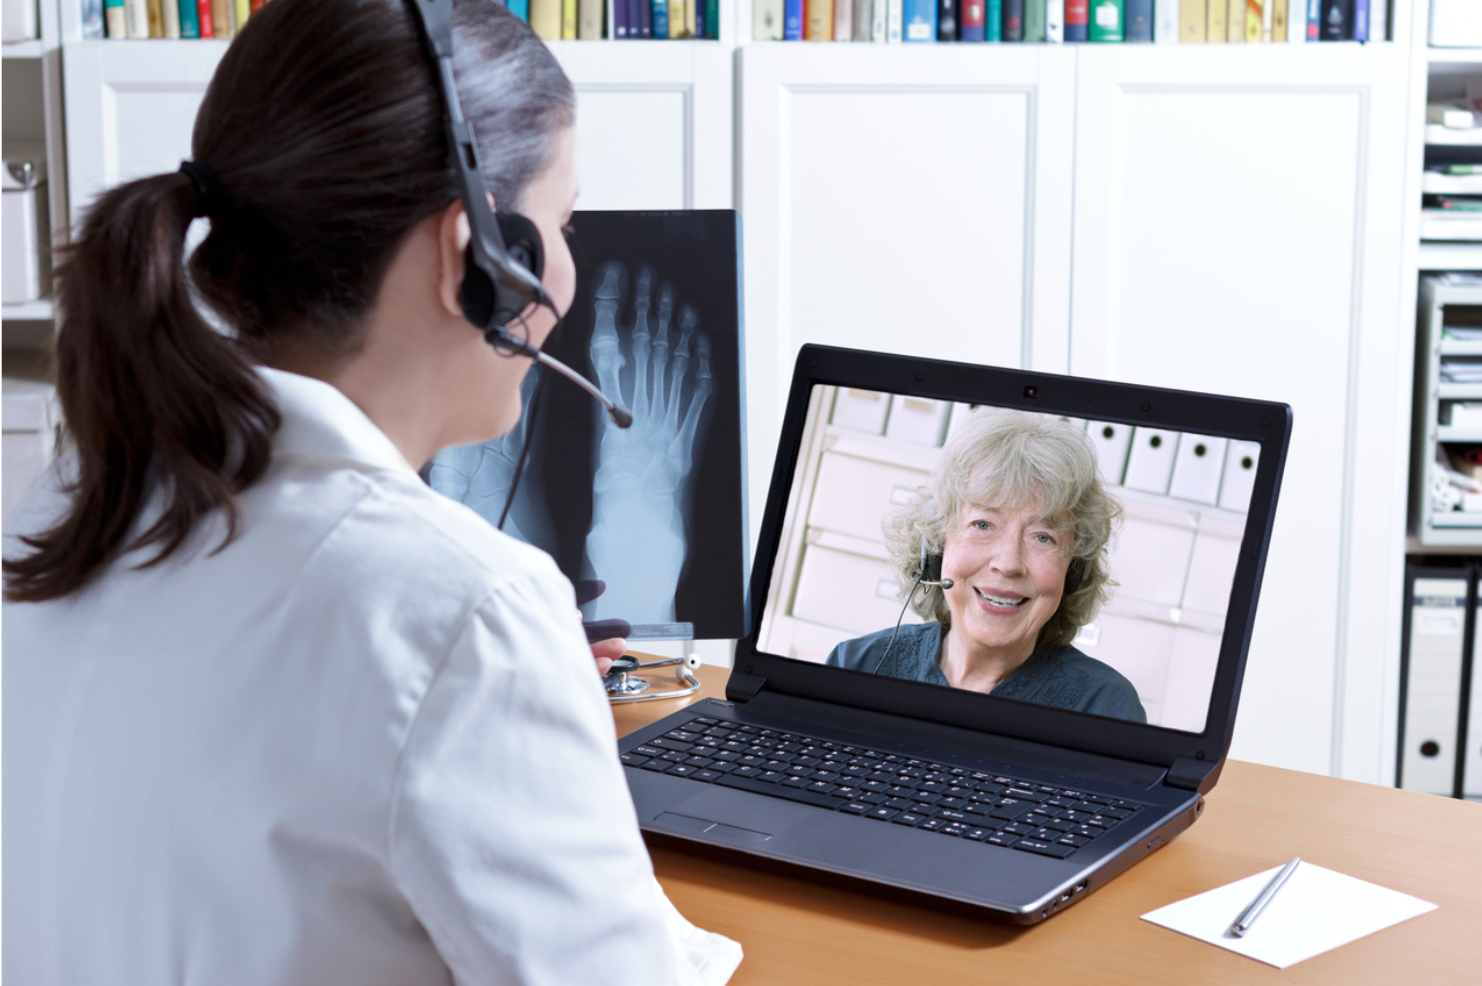 Telemedicine Associated With Direct, Indirect Cost Savings for Patients With Cancer